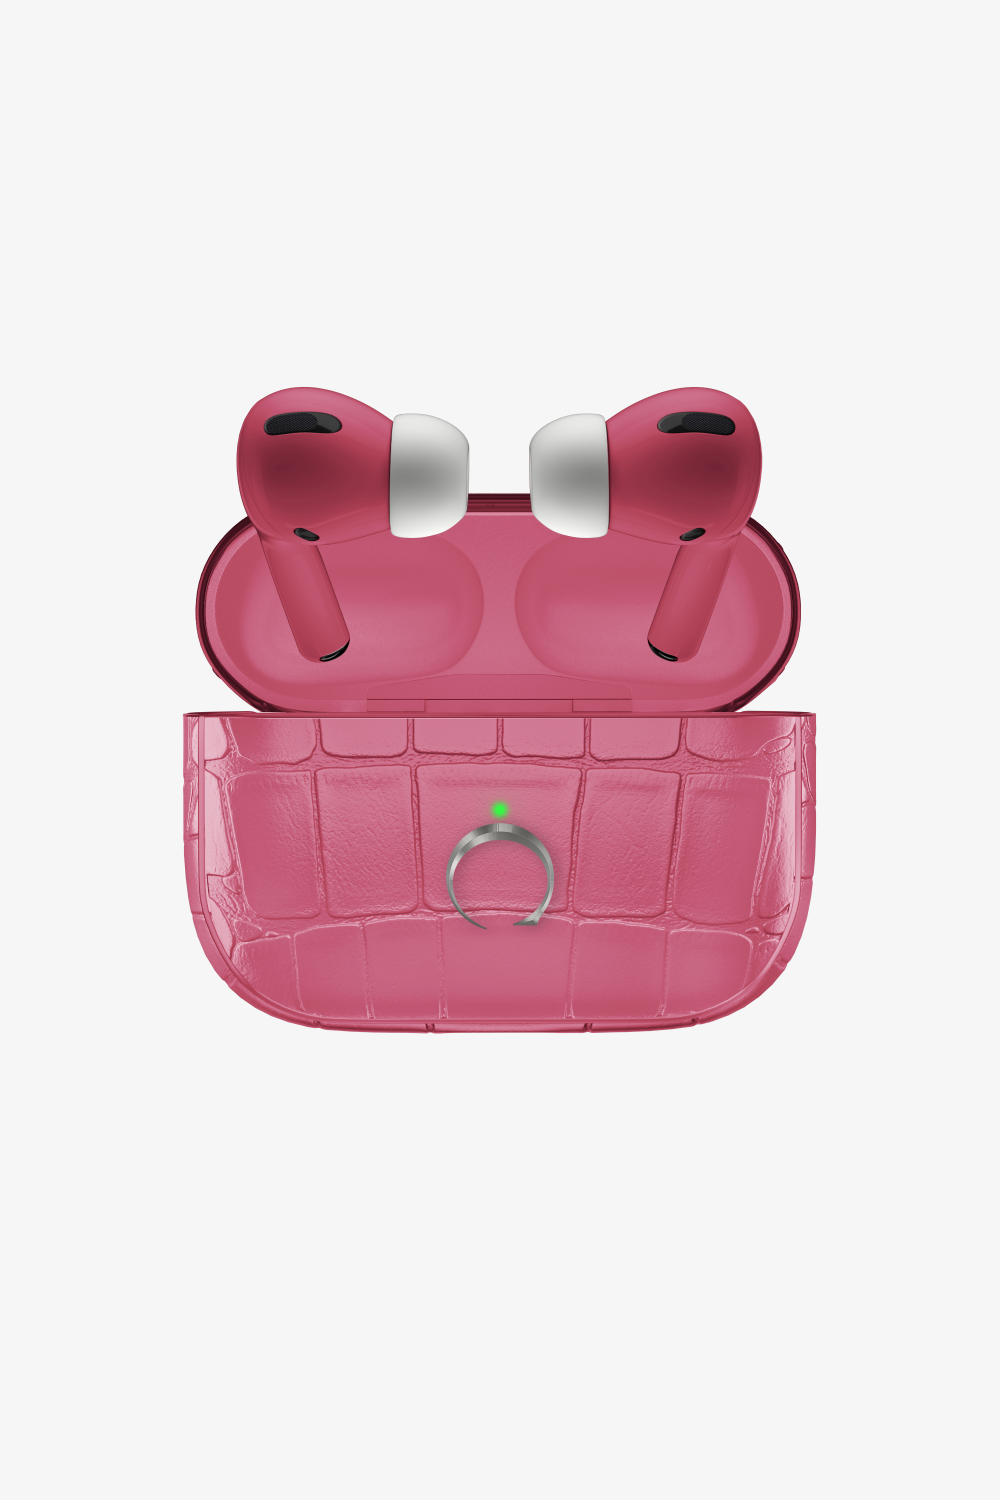 Alligator Airpods Pro 2nd Generation - Stainless Steel / Pink - zollofrance